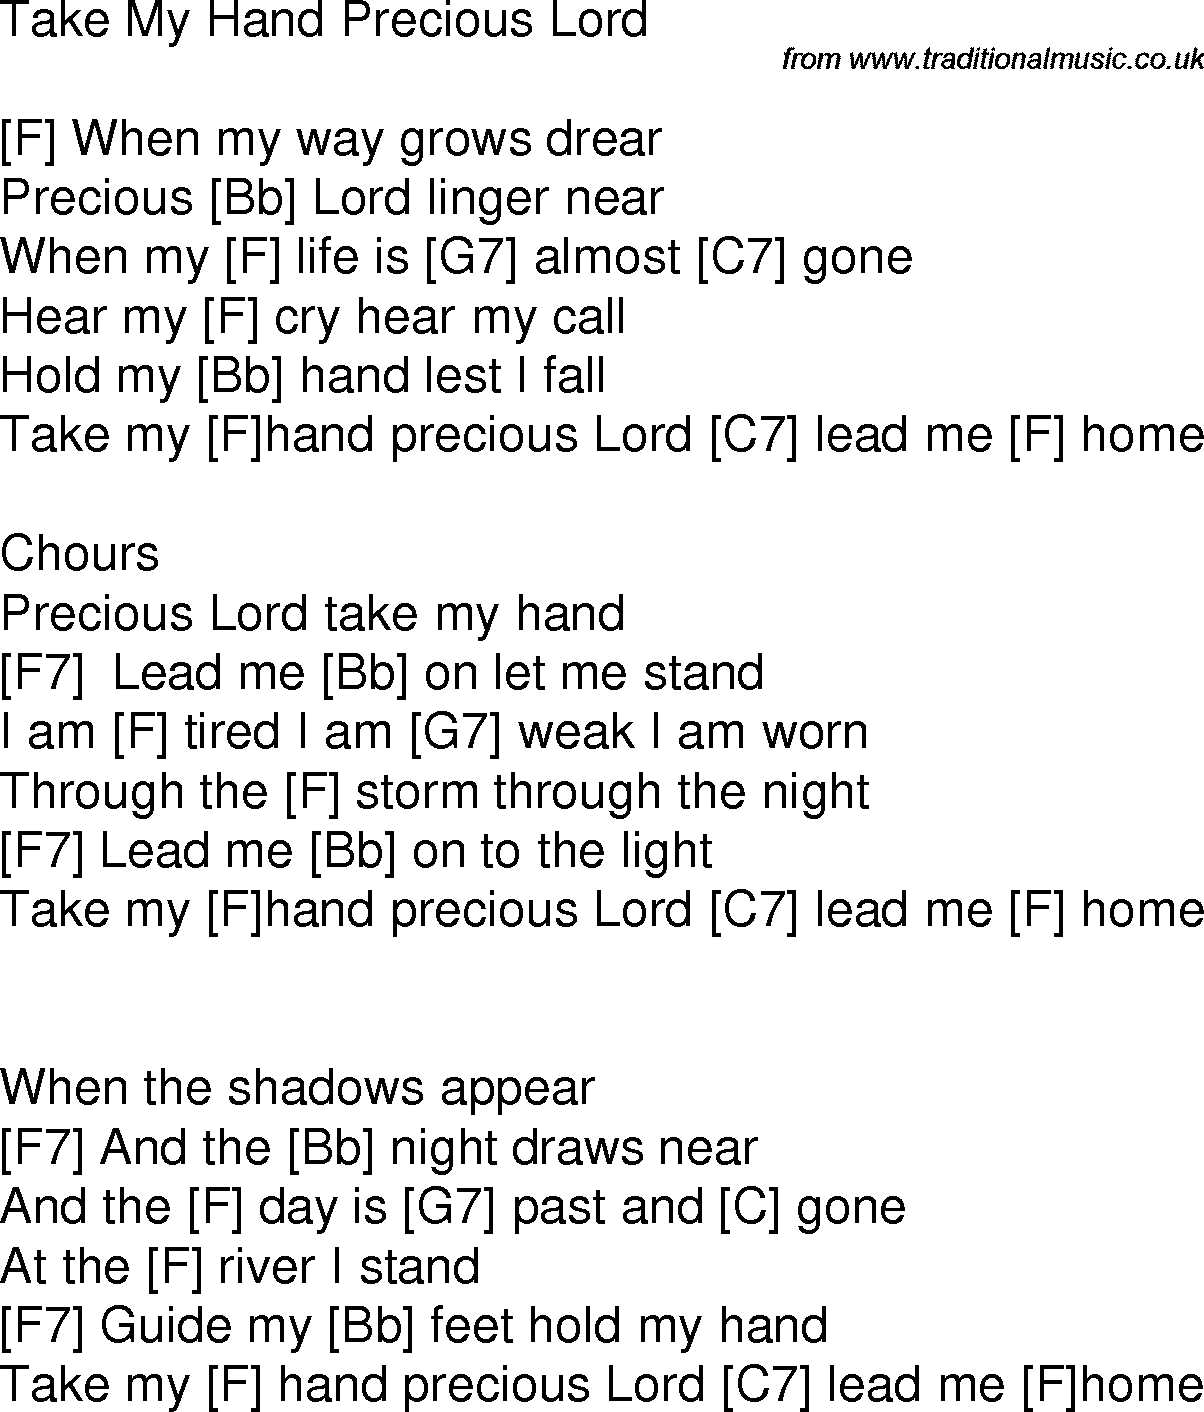 Old time song lyrics with chords for Take My Hand Precious Lord F